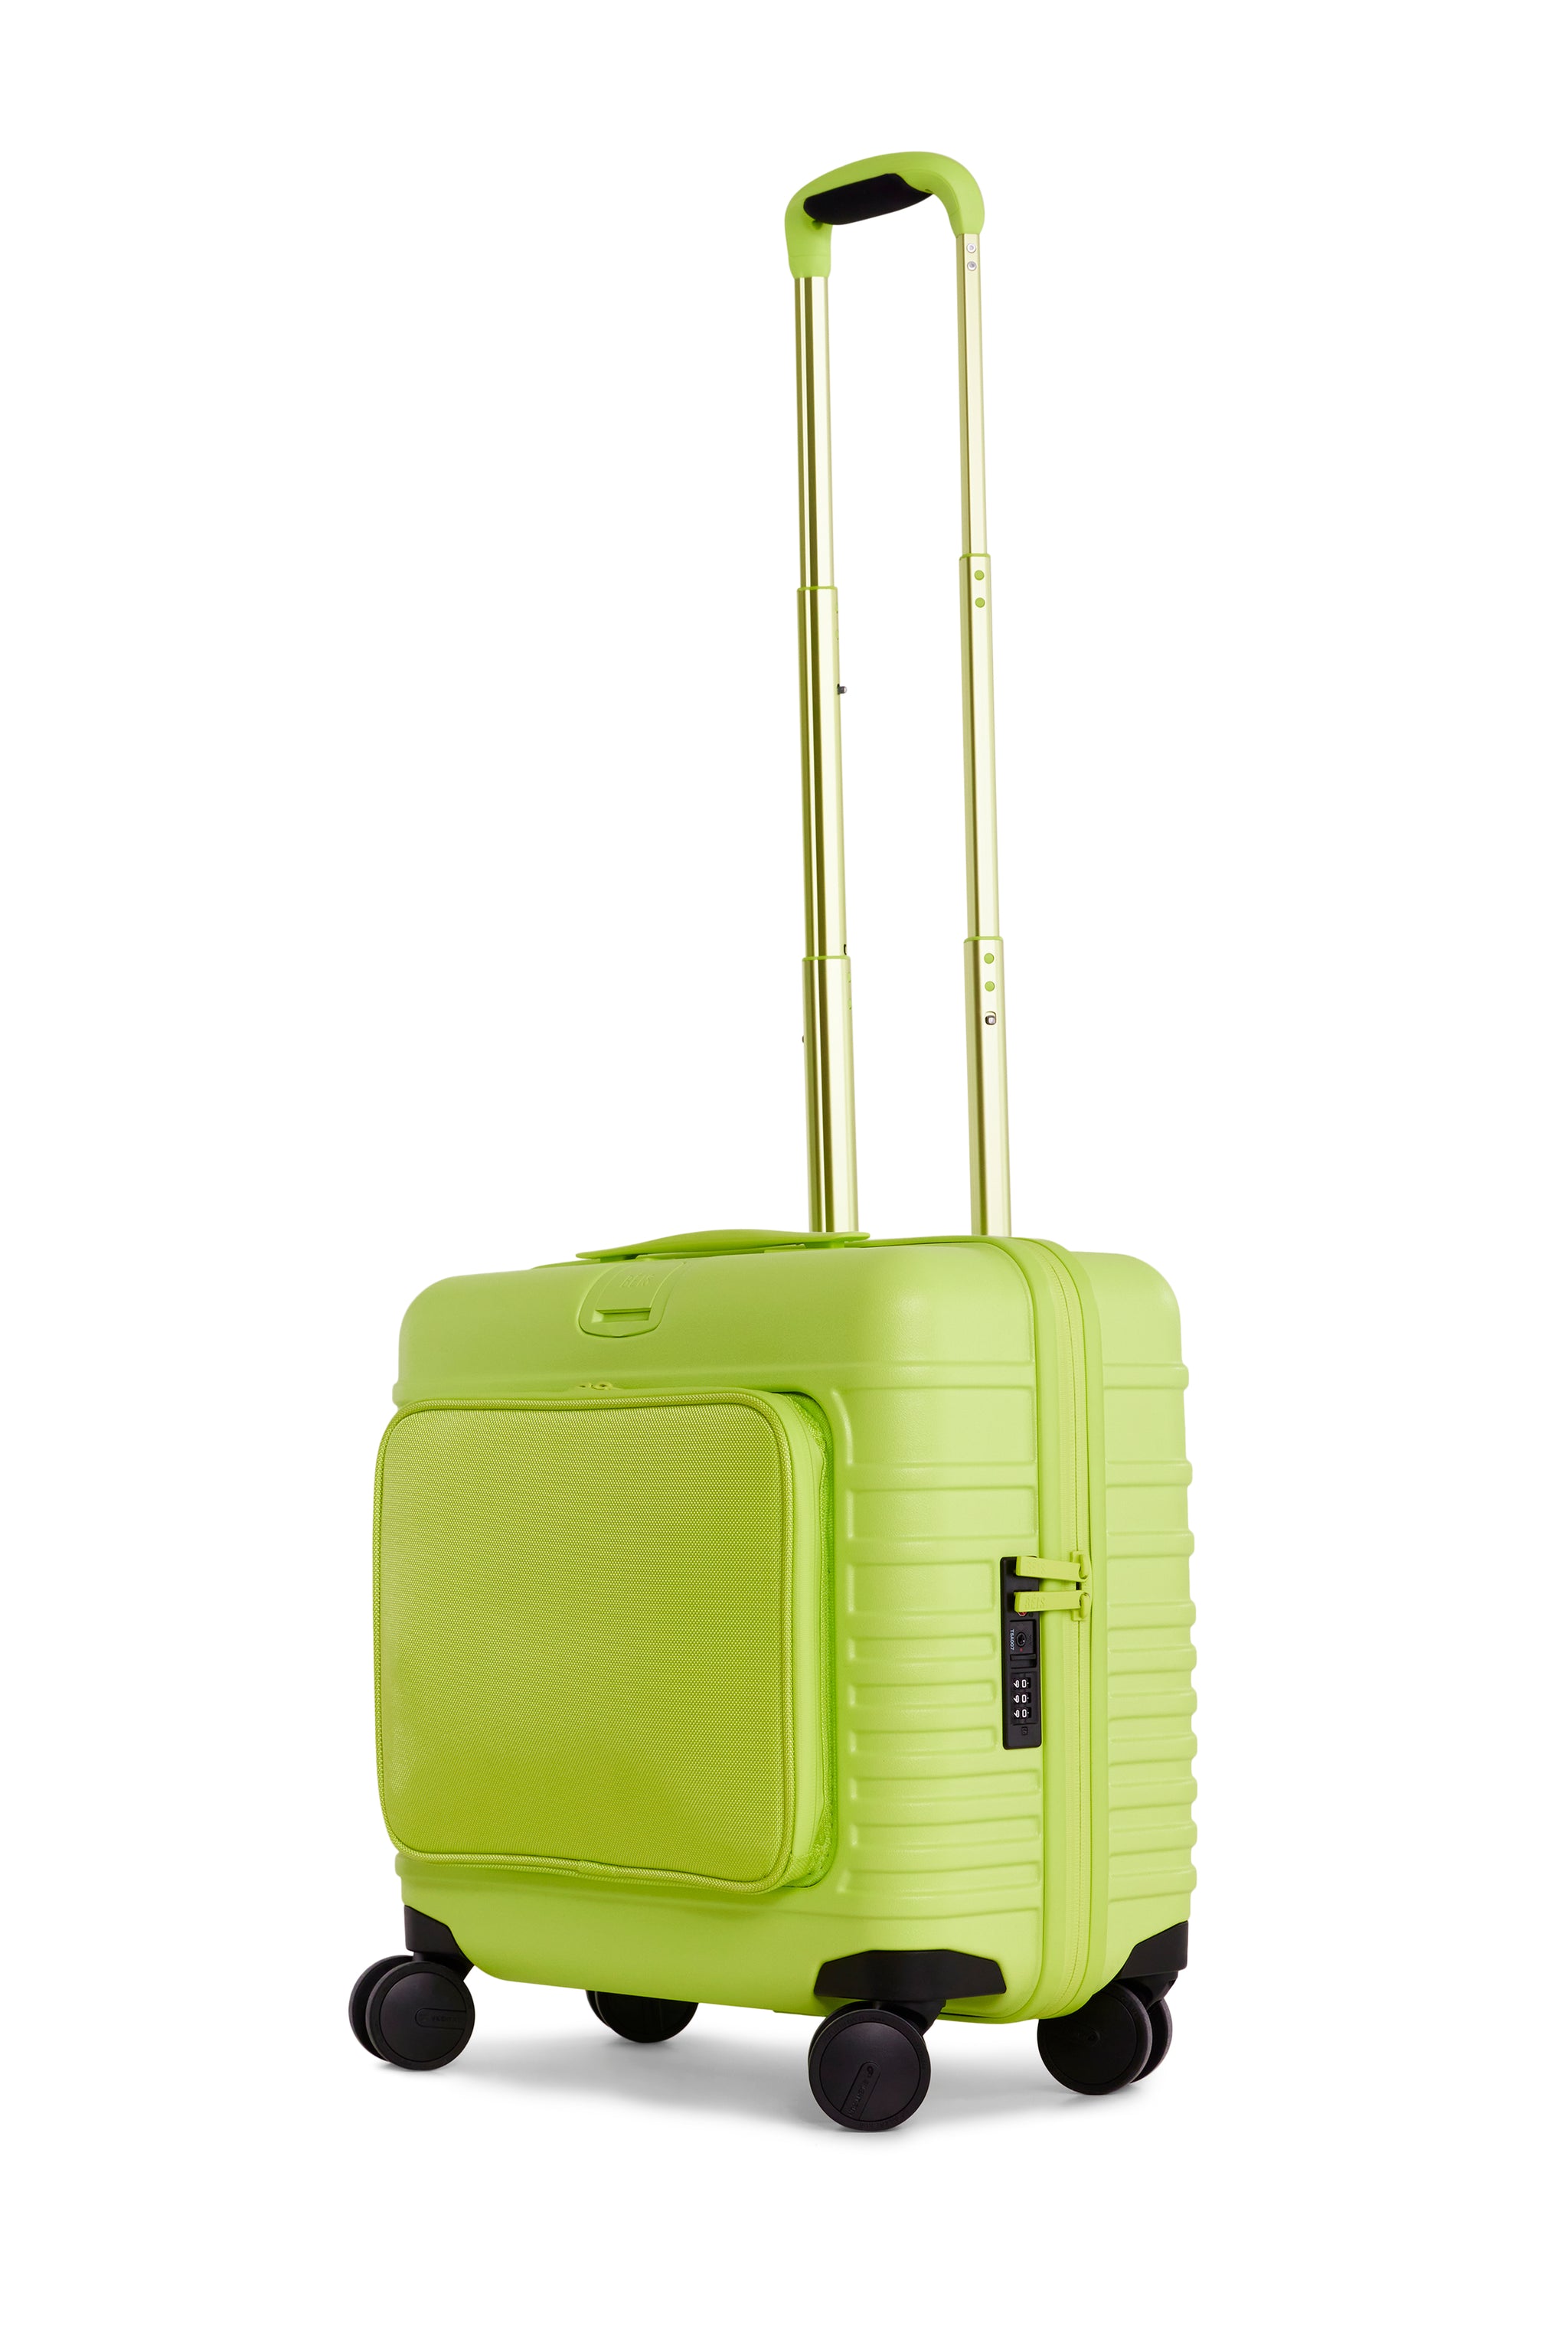 BÉIS 'The Kids Roller' in Citron - Kids Suitcases & Rolling Luggage In ...